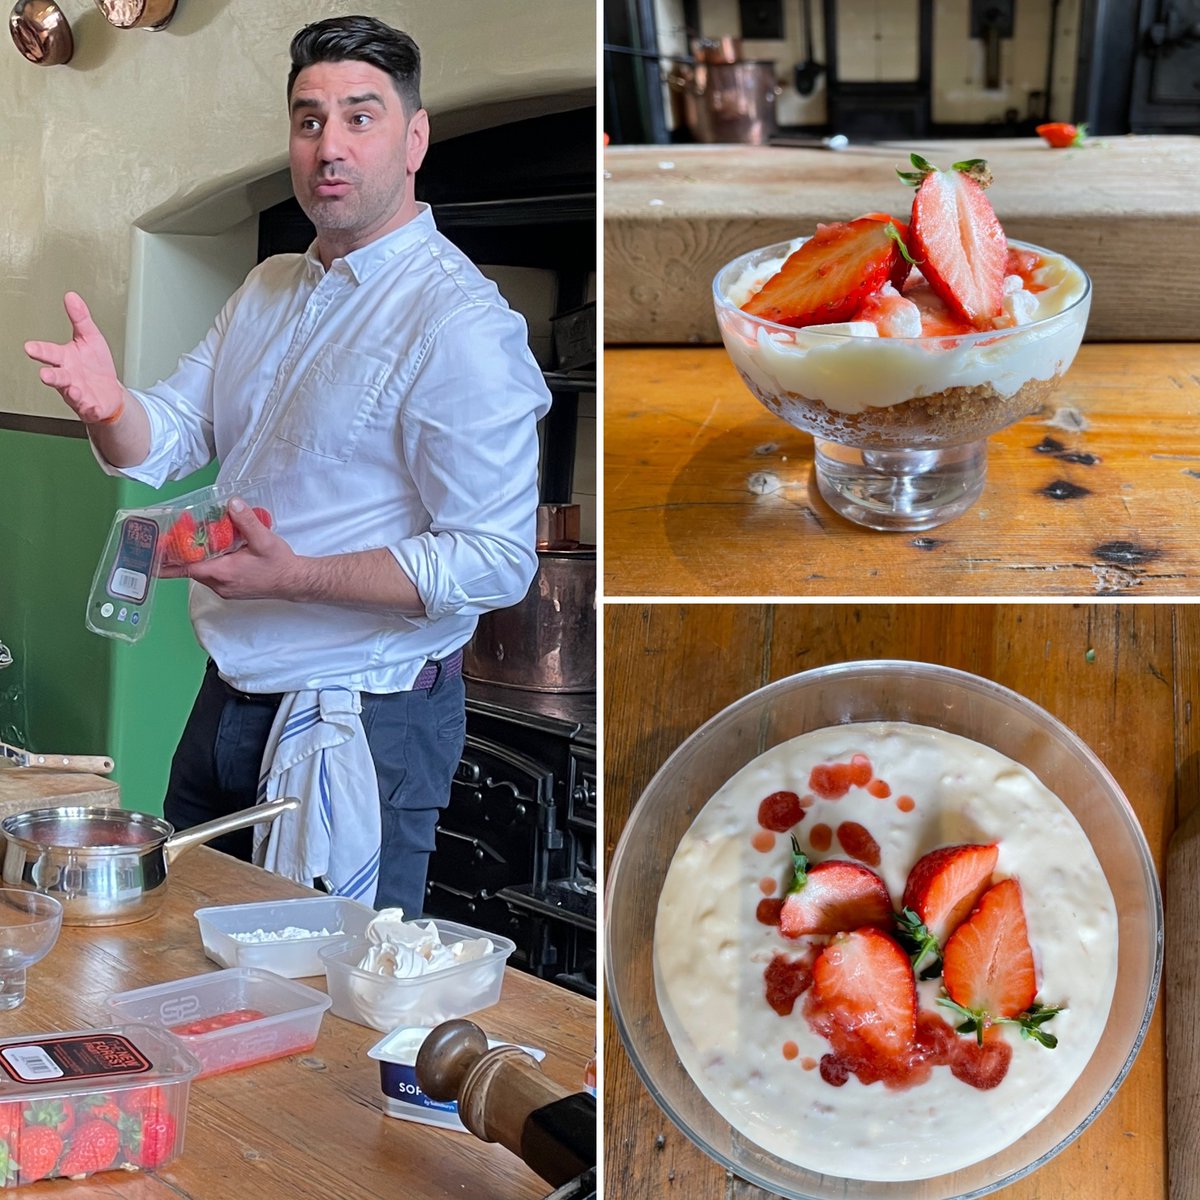 Great day @Beaulieu_Hants BBC Gardeners World Fair today. 
Big thanks to @Chris_Bavin for using our 🍓for cooking demo & supporting local produce. 🍓💪🇬🇧
#buybritish #SupportLocal #britishstrawberries 🍓